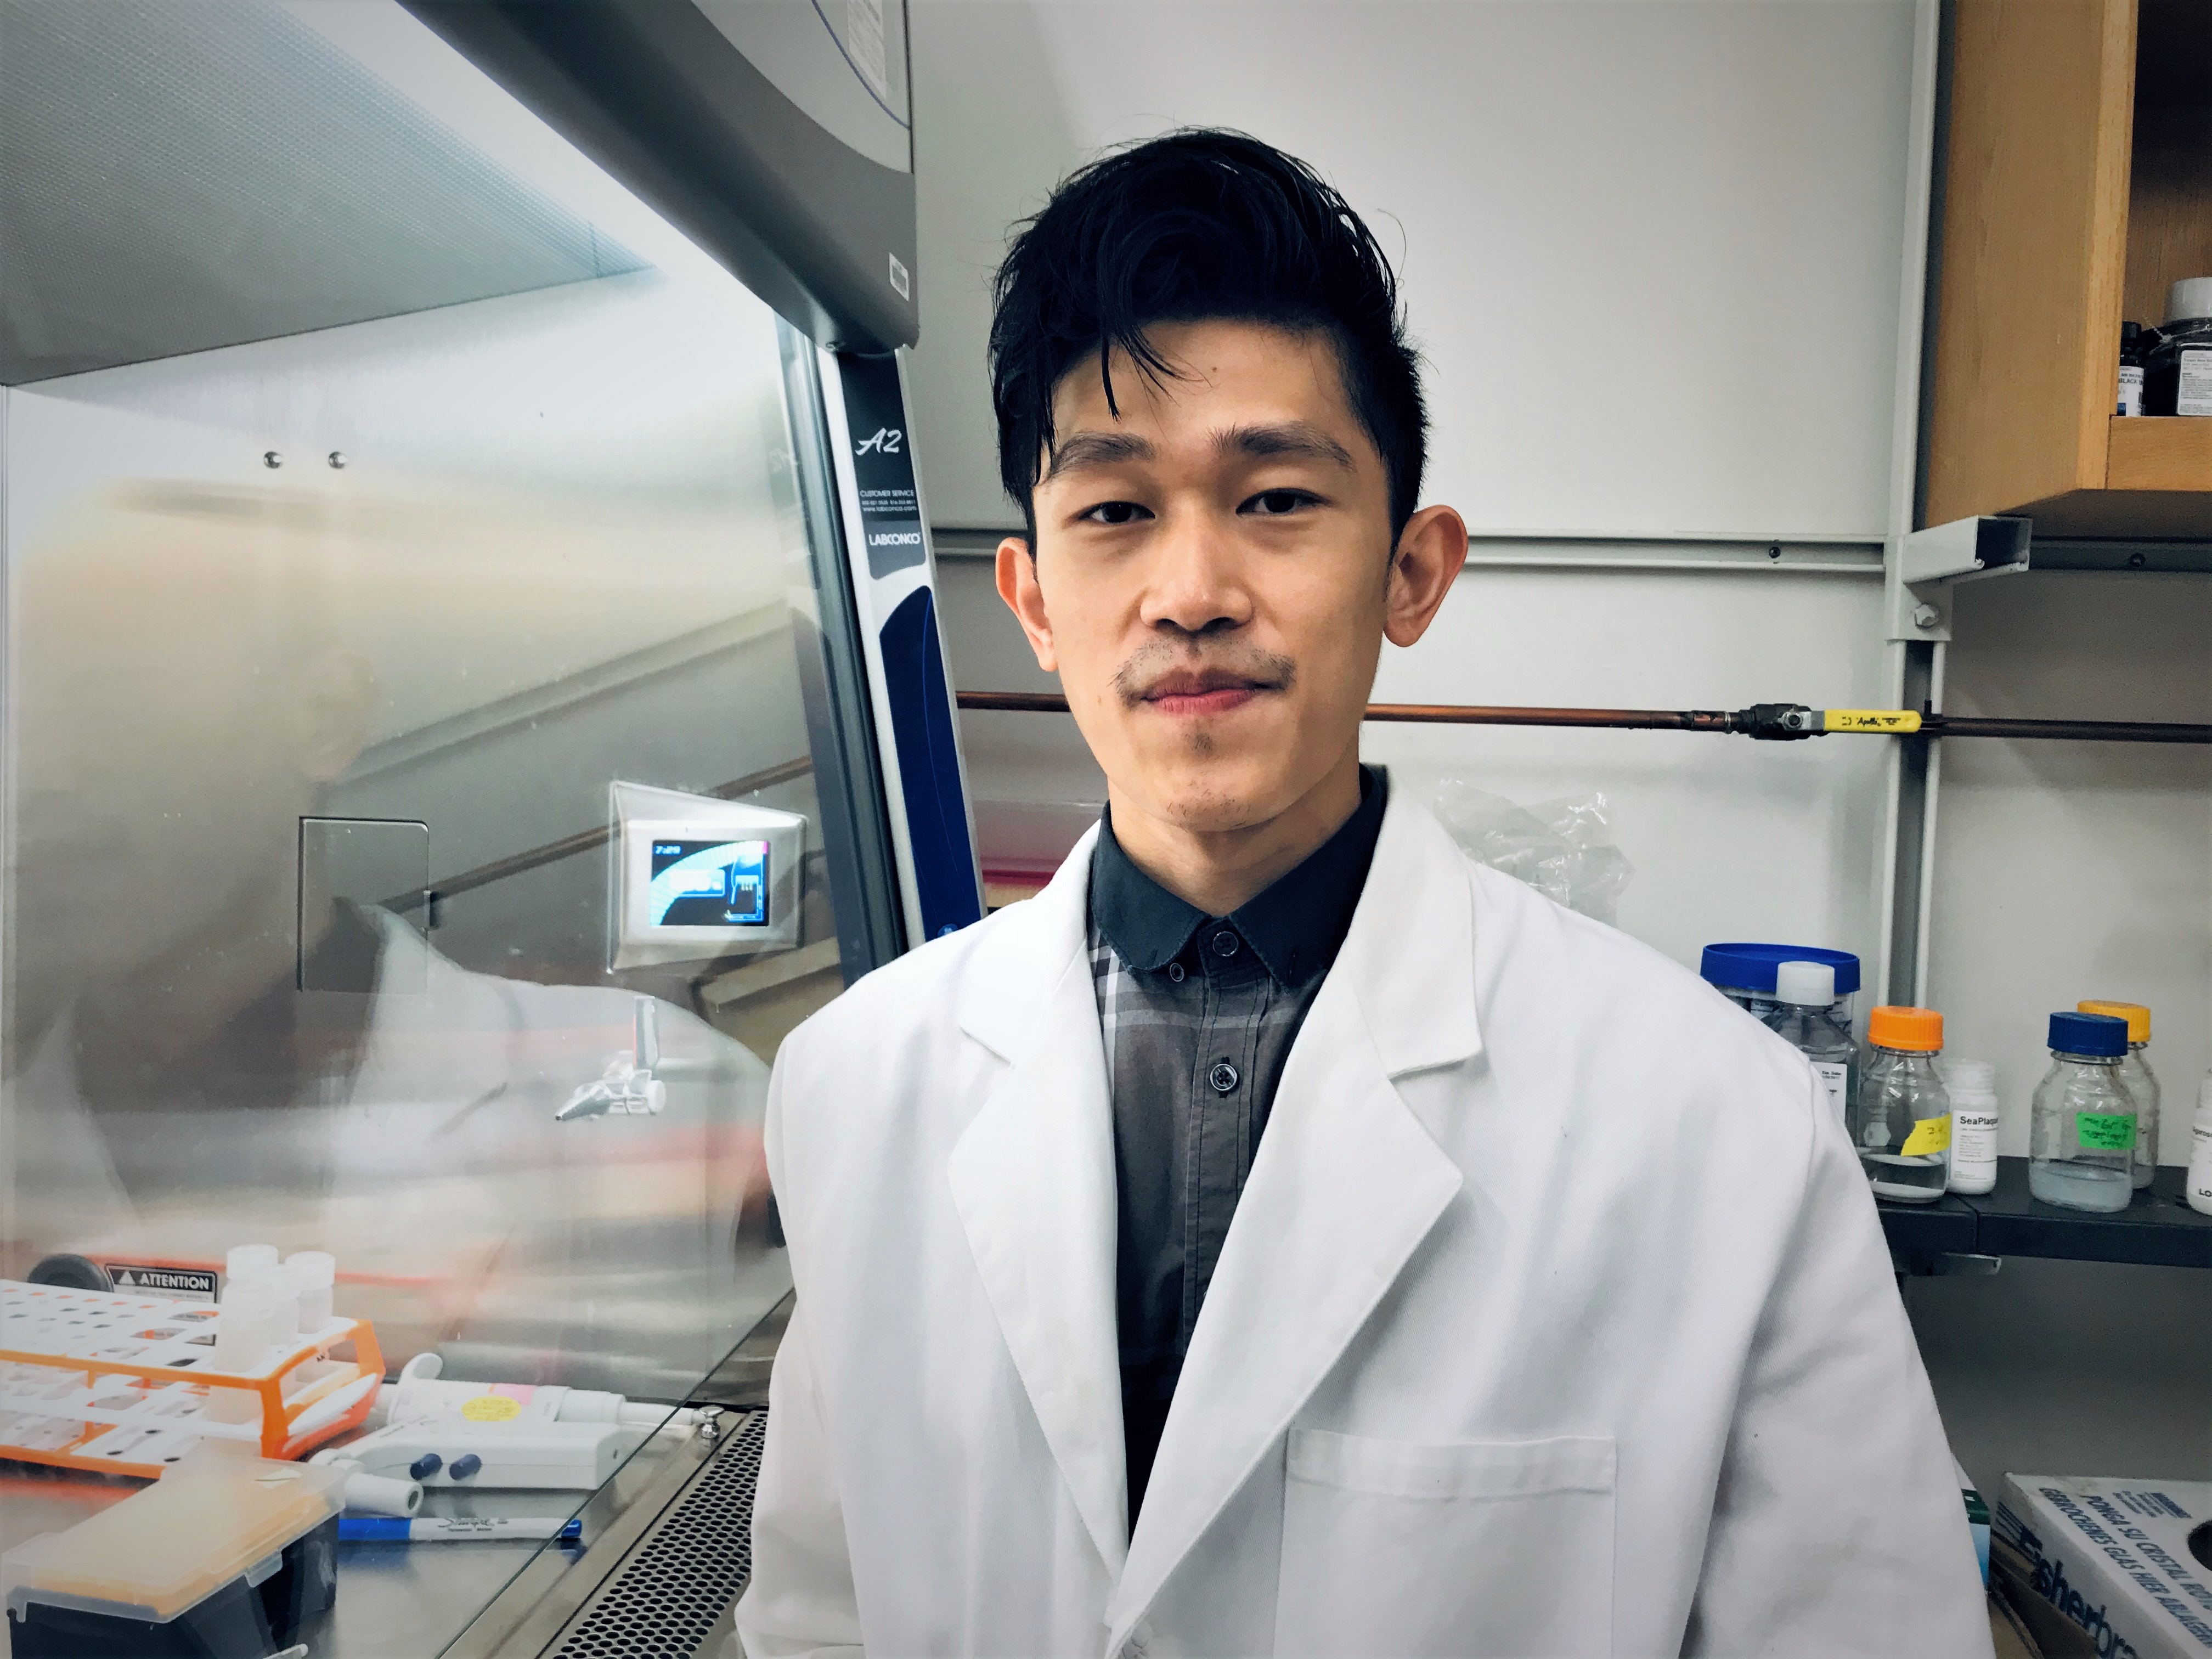 Kaung Myat San in the lab, wearing a white coat